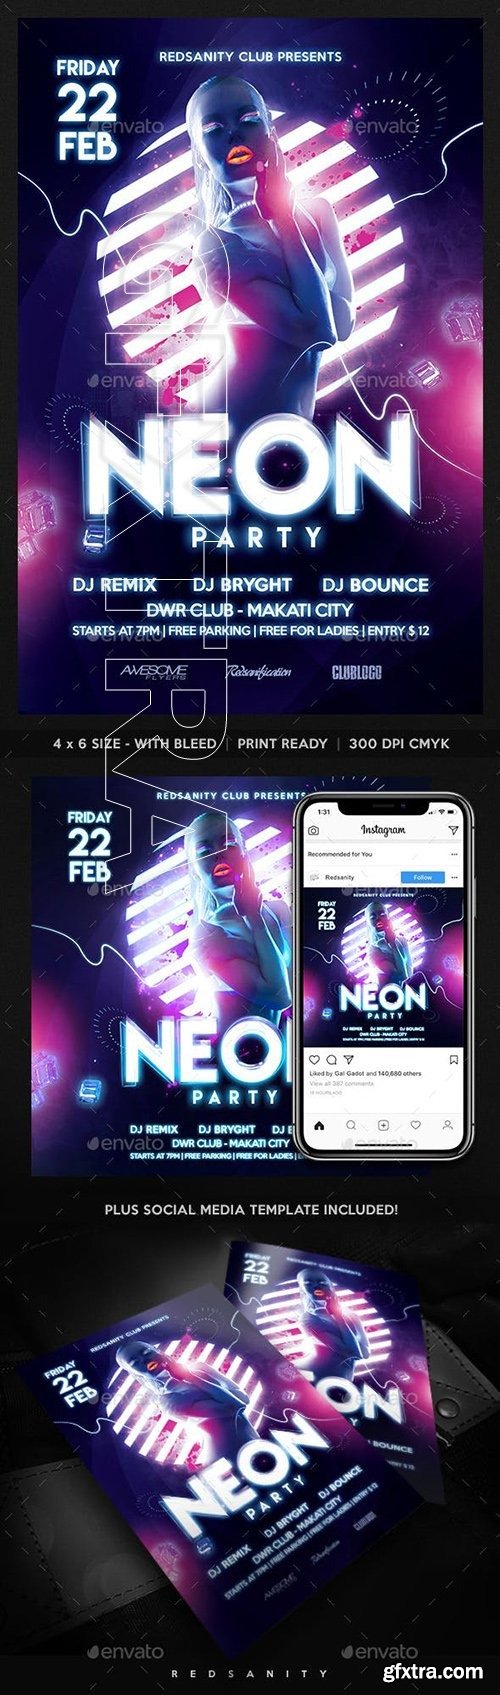 GraphicRiver - Neon Party Flyer 23113805